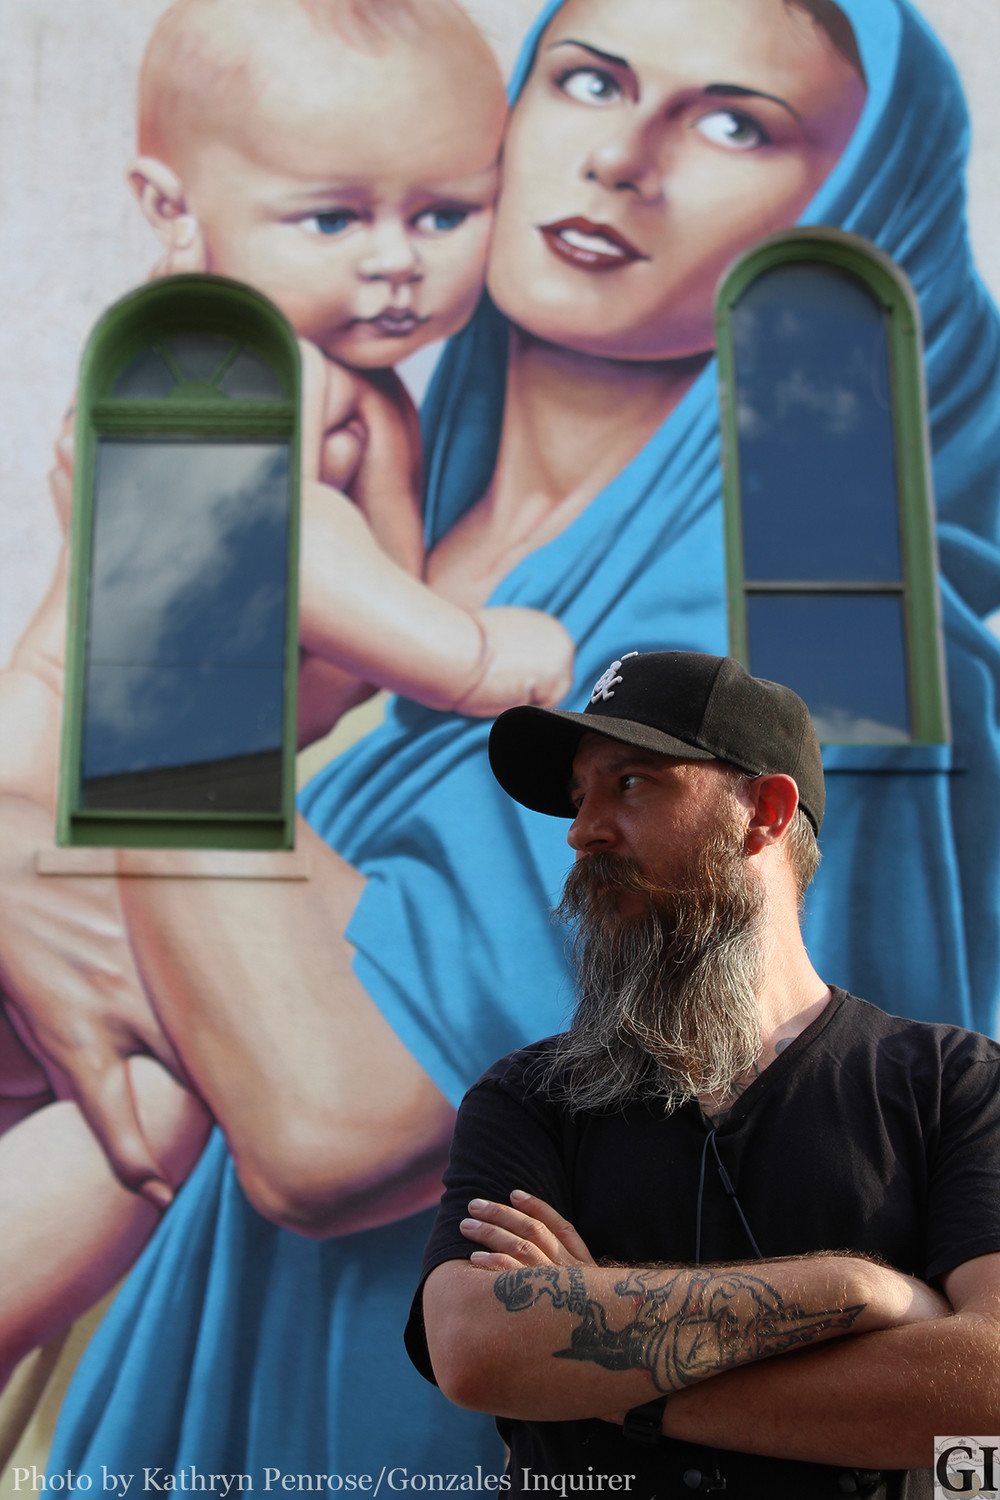 Artist Mez Data, pictured, spent five days painting this representation of Susanna Dickinson and her baby Angelina Elizabeth "Babe of The Alamo" Dickinson, on the Josephine Peck building, owned by Larry and Johnnie Edwards. The building is located on the Southwest corner of St. Joseph Street and St. George Street.